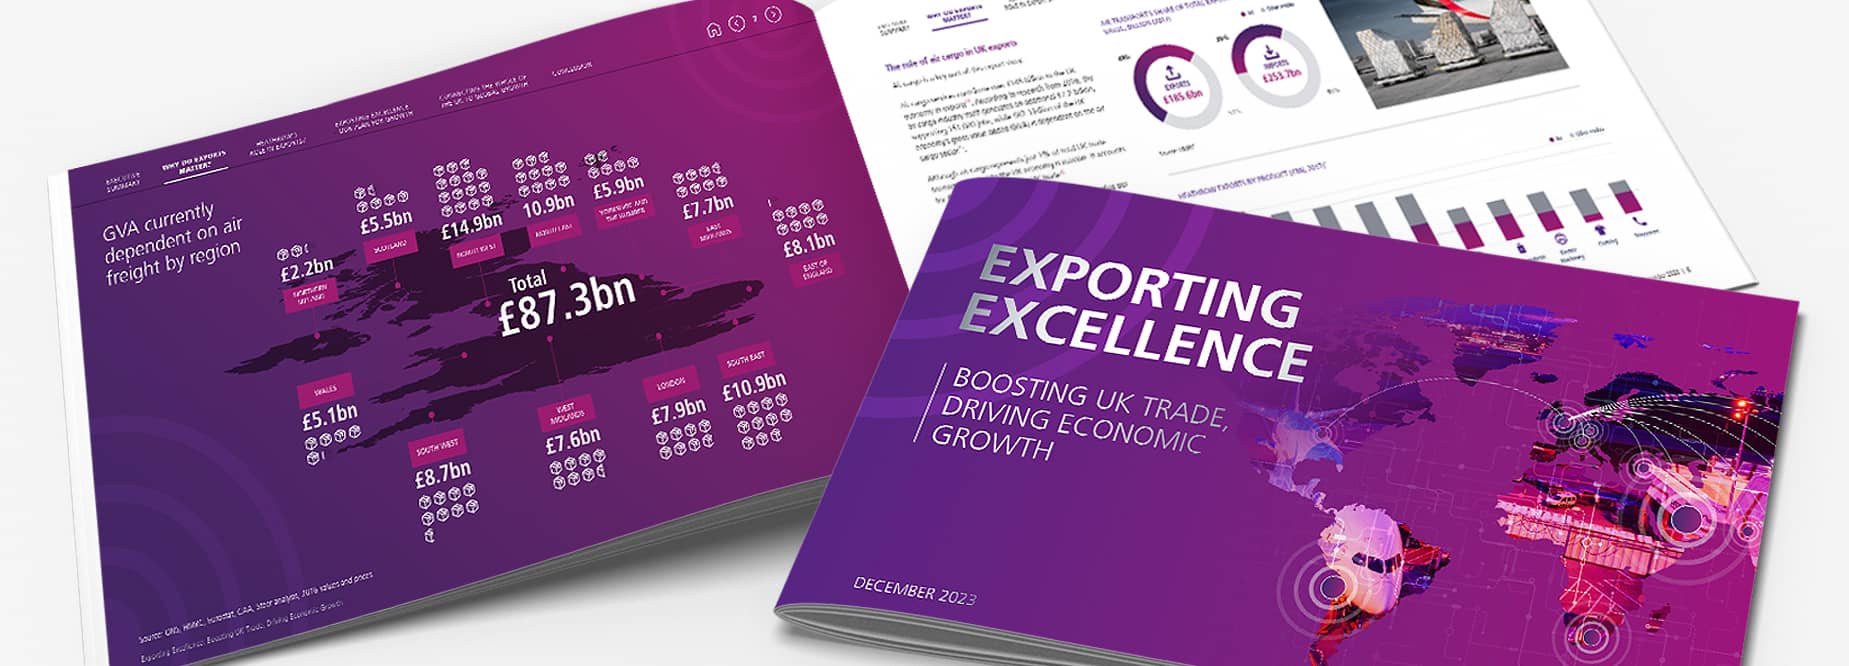 Introducing Heathrow's 'Exporting Excellence' Report